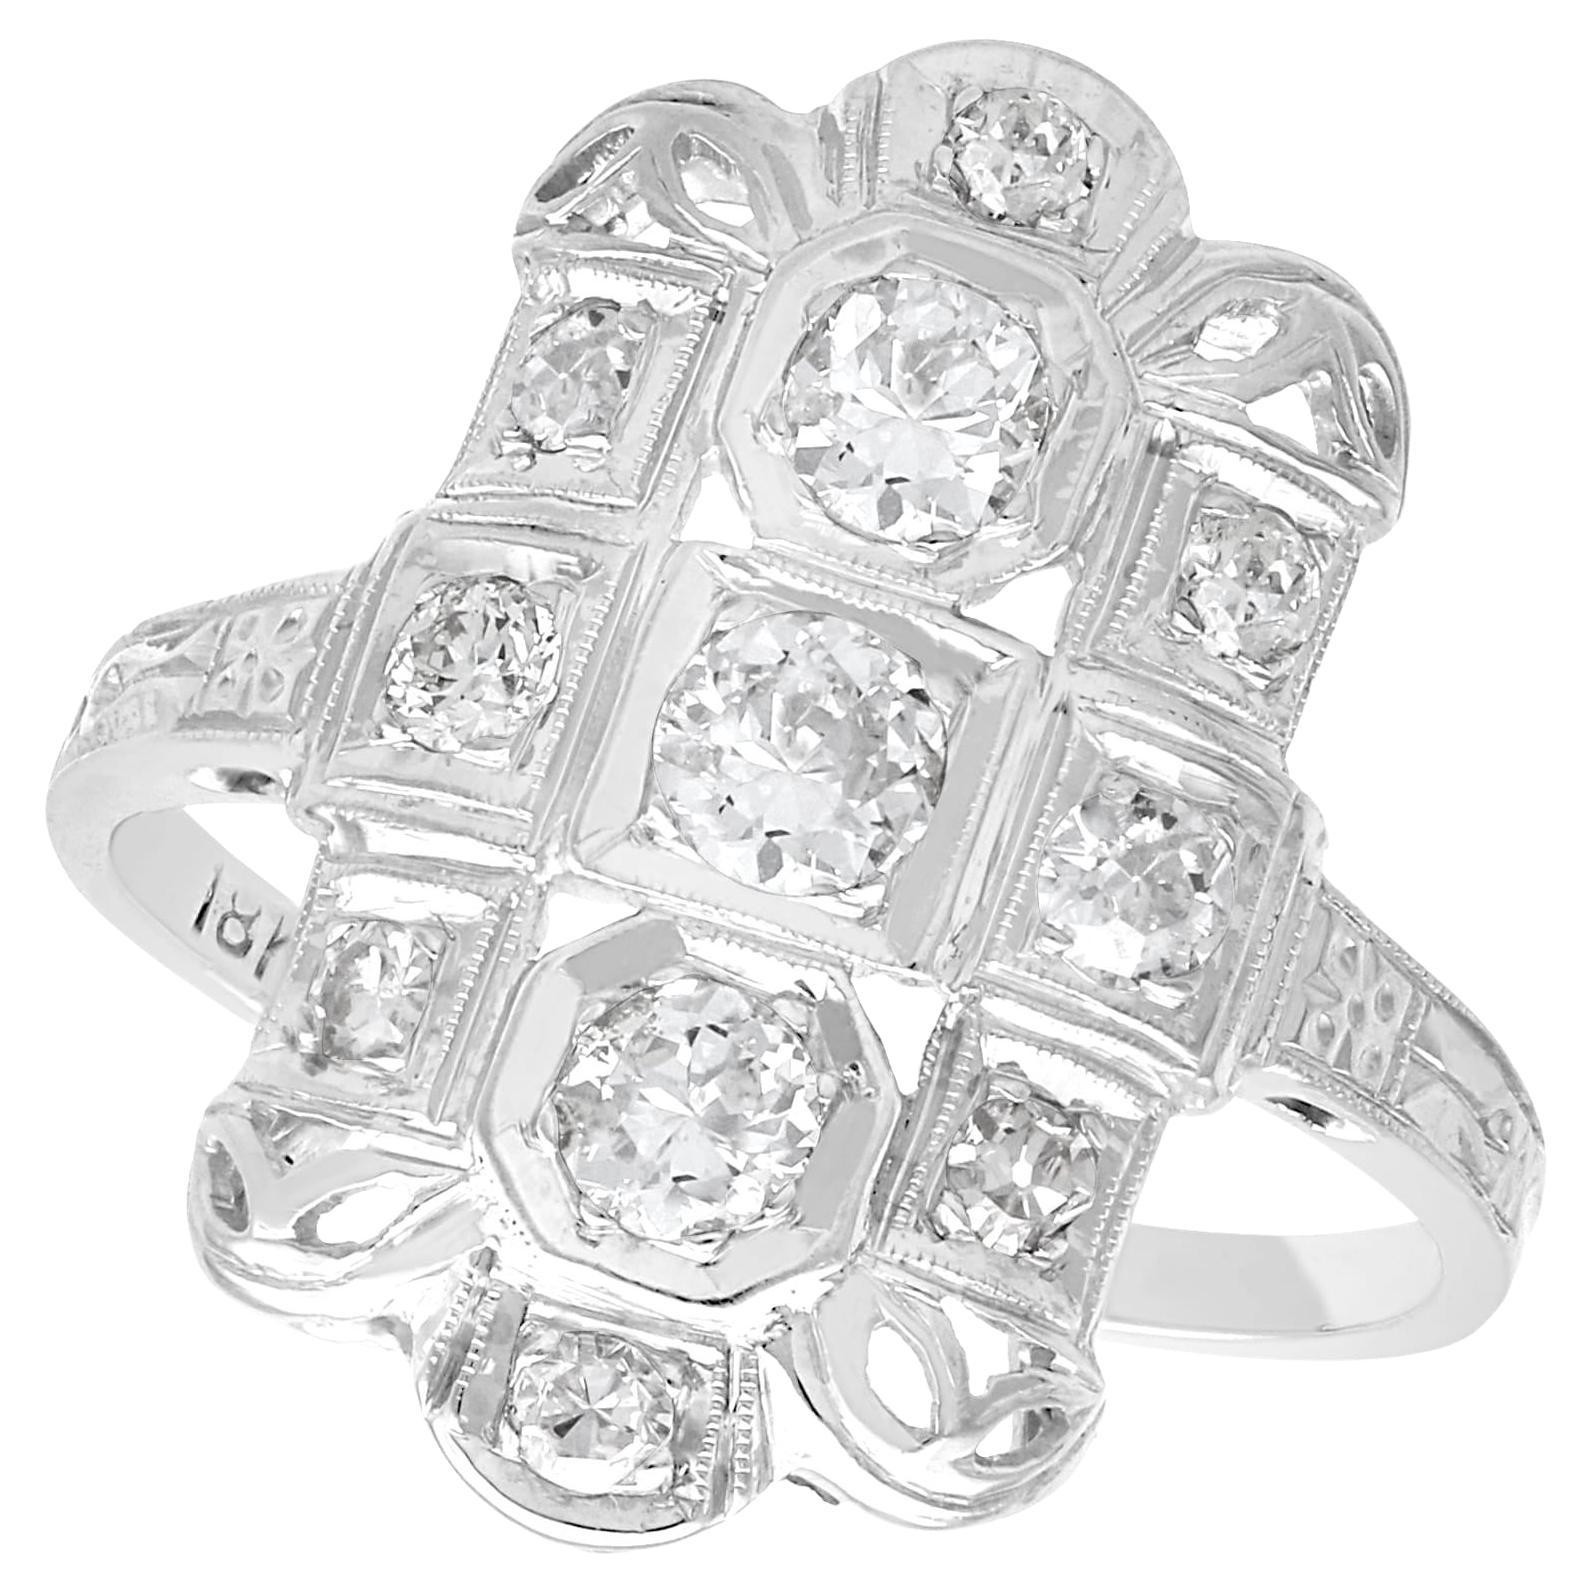 1920s Art Deco 1.14 Carat Diamond and 18k White Gold Dress Ring For Sale